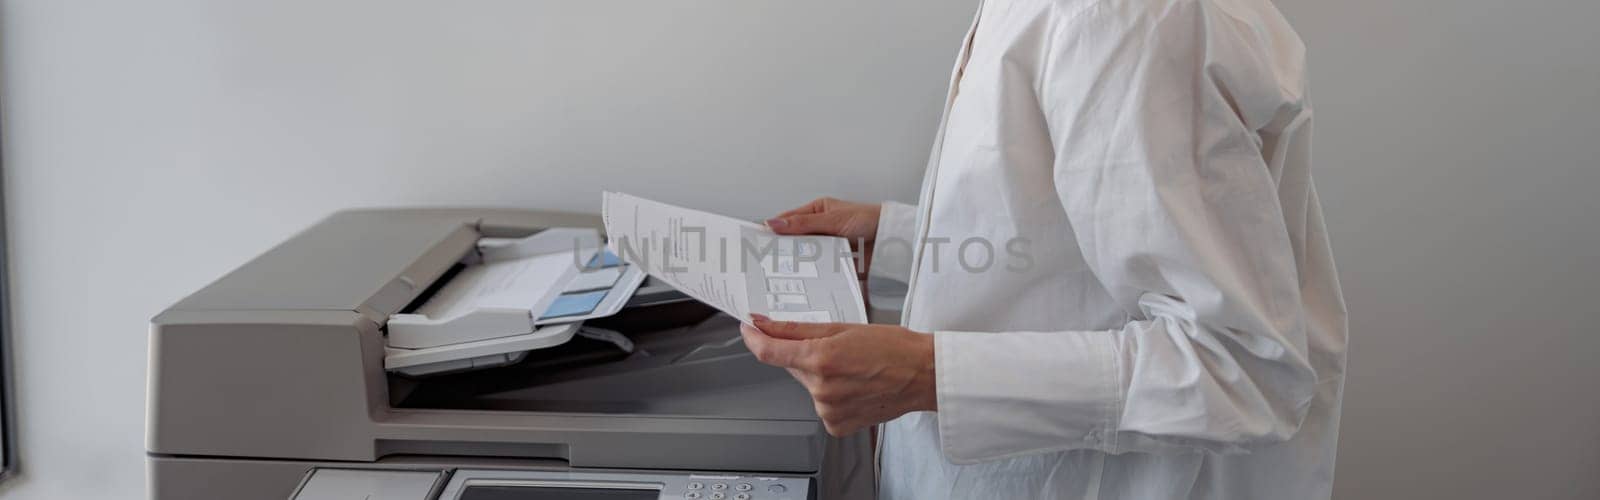 Focused woman worker scanning document on photocopy machine In modern office. Blurred background